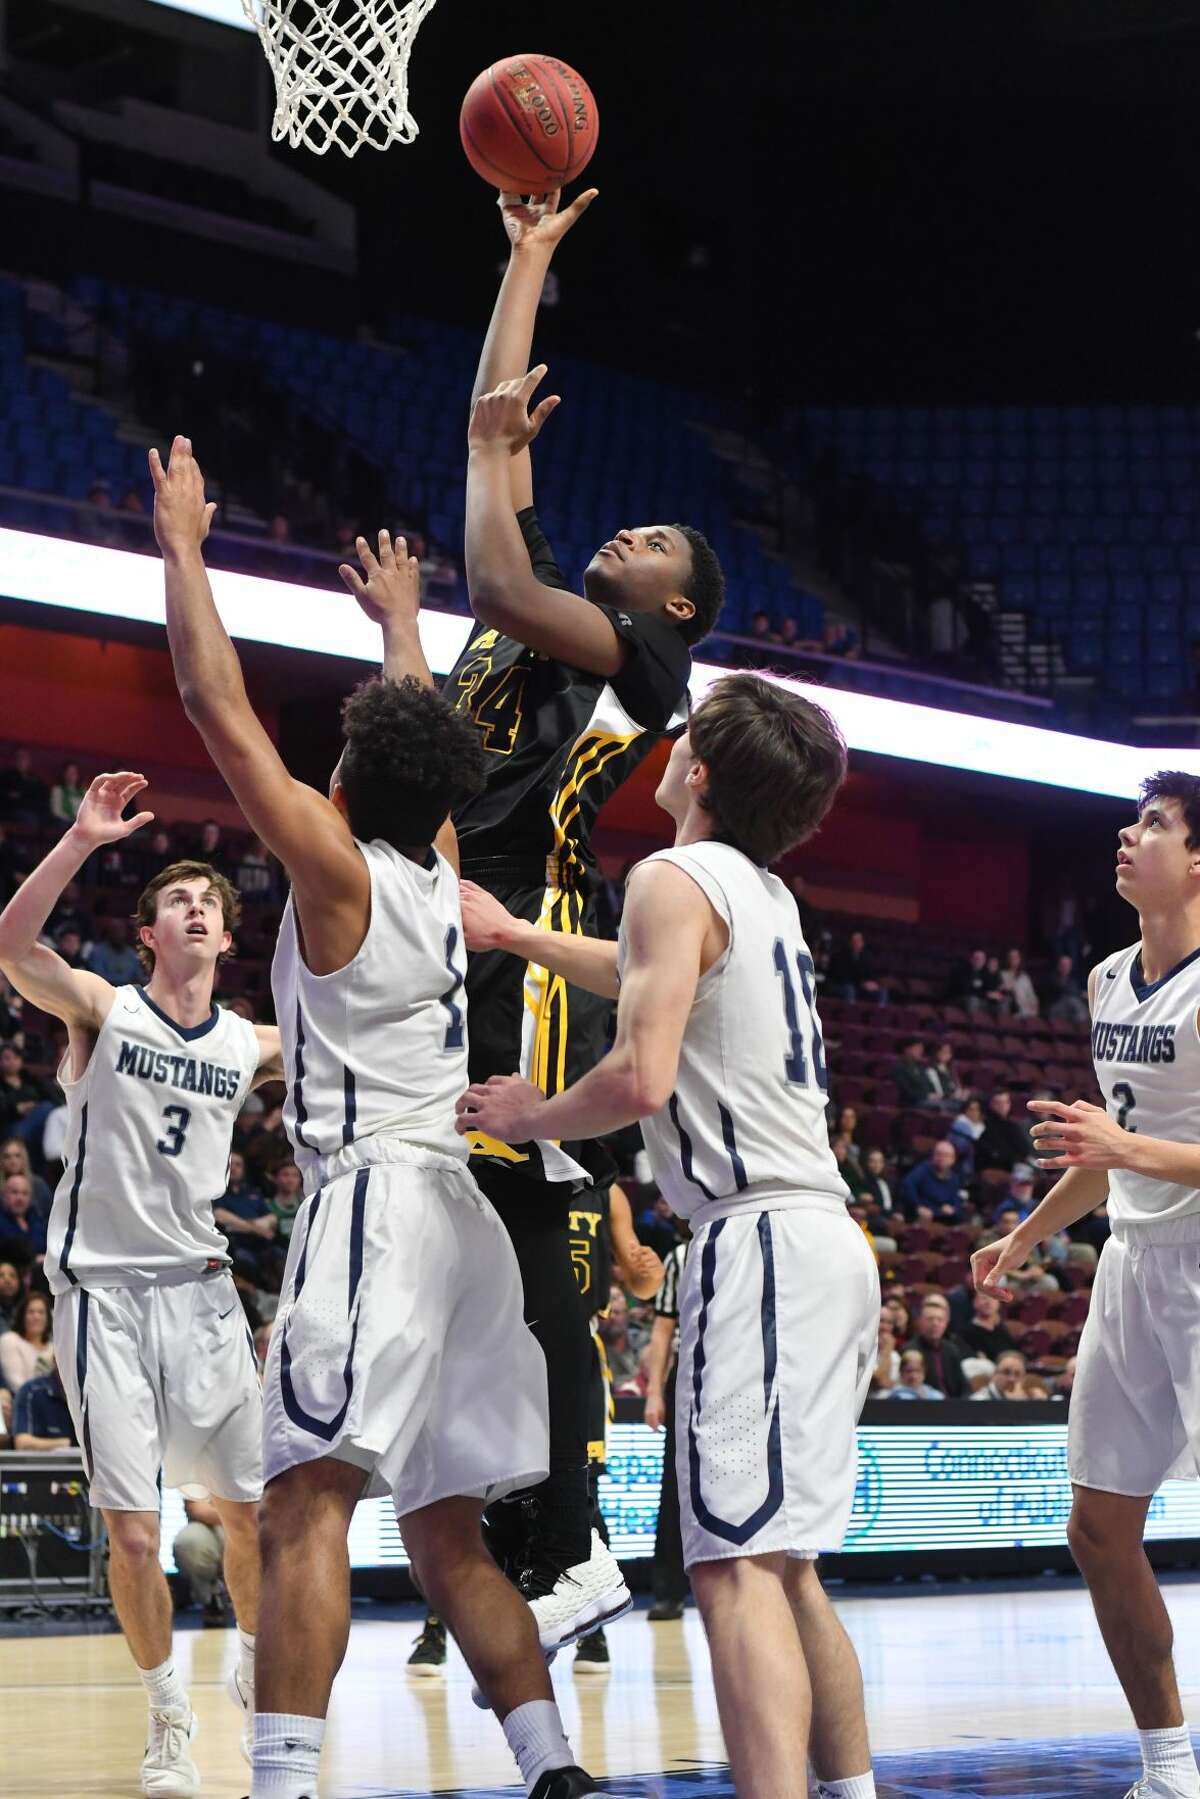 Amity’s Brian Curtin shoots a short jumper during the Division II championship game on Saturday.